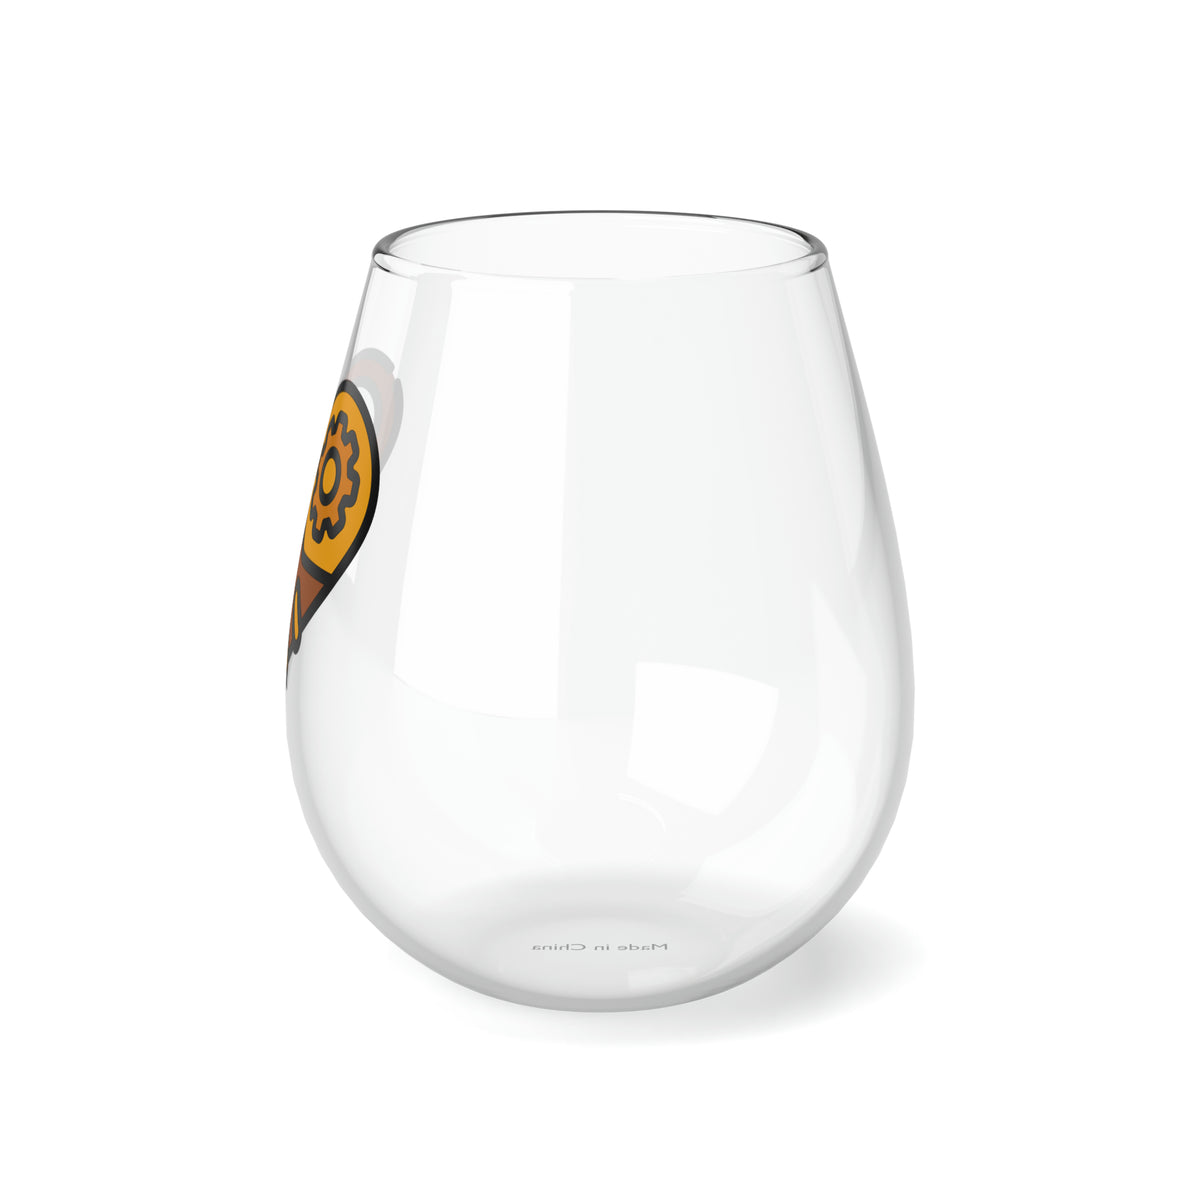 Stemless Wine Glass, 11.75oz with we love Steampunk print